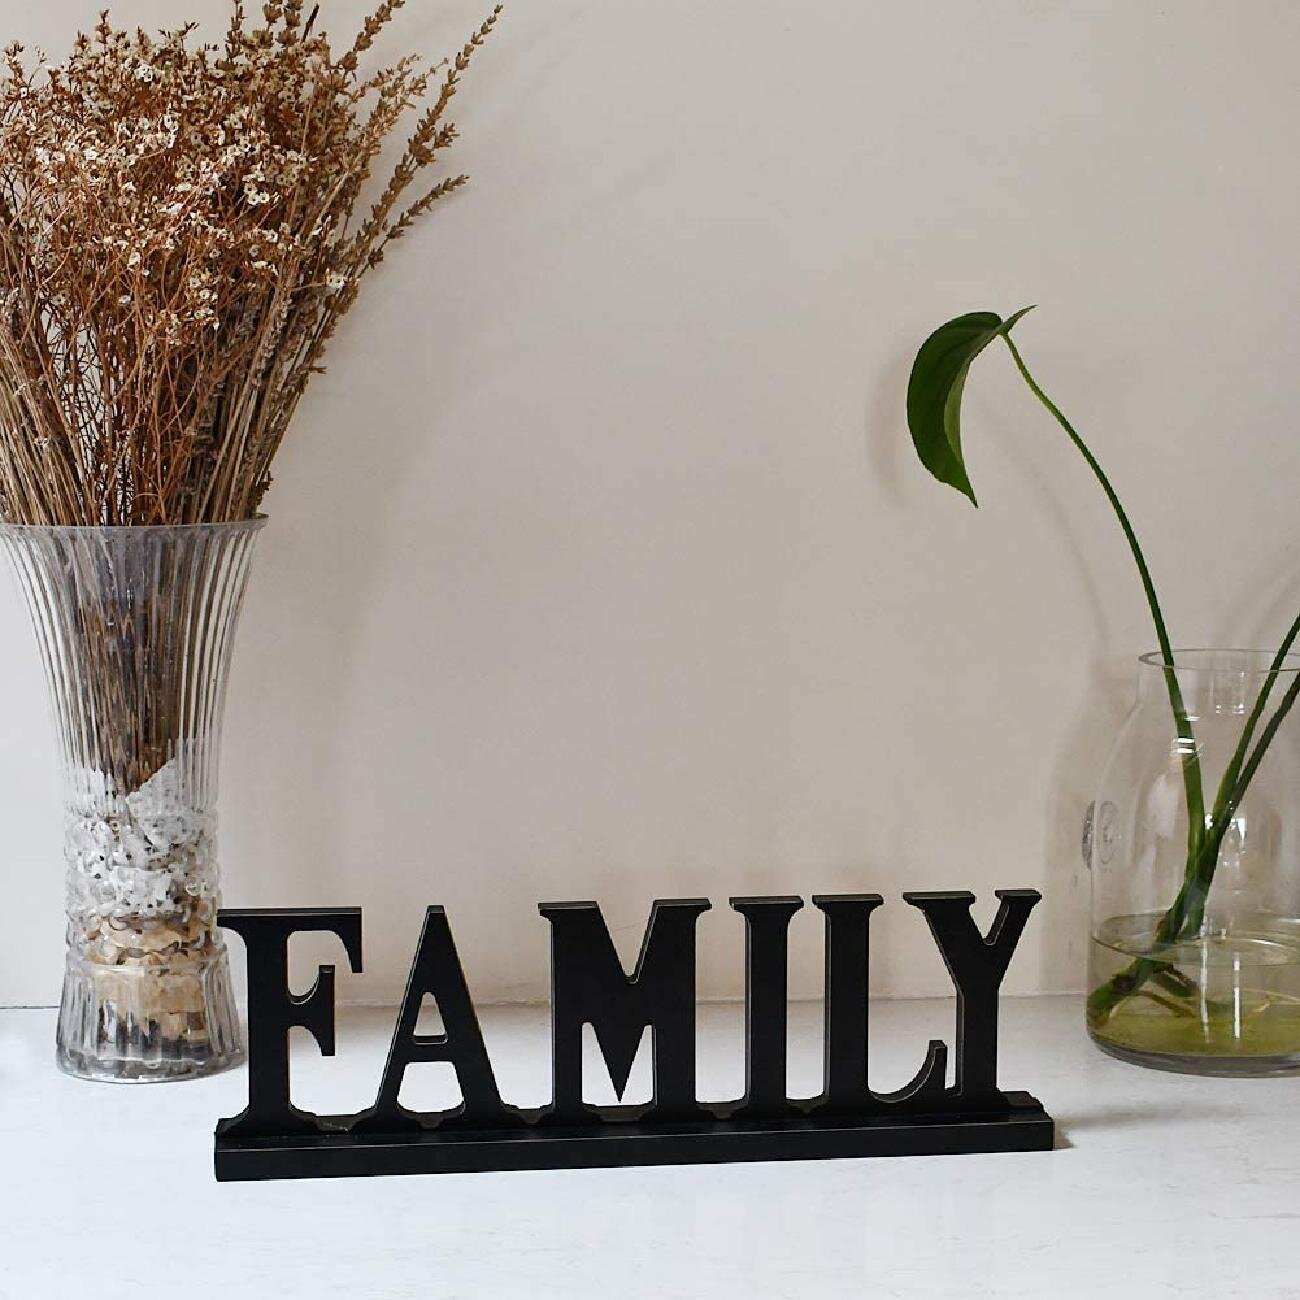 HOME Plaque Free Standing Wooden Letters Sign Home Decorative Ornaments GIFT New 